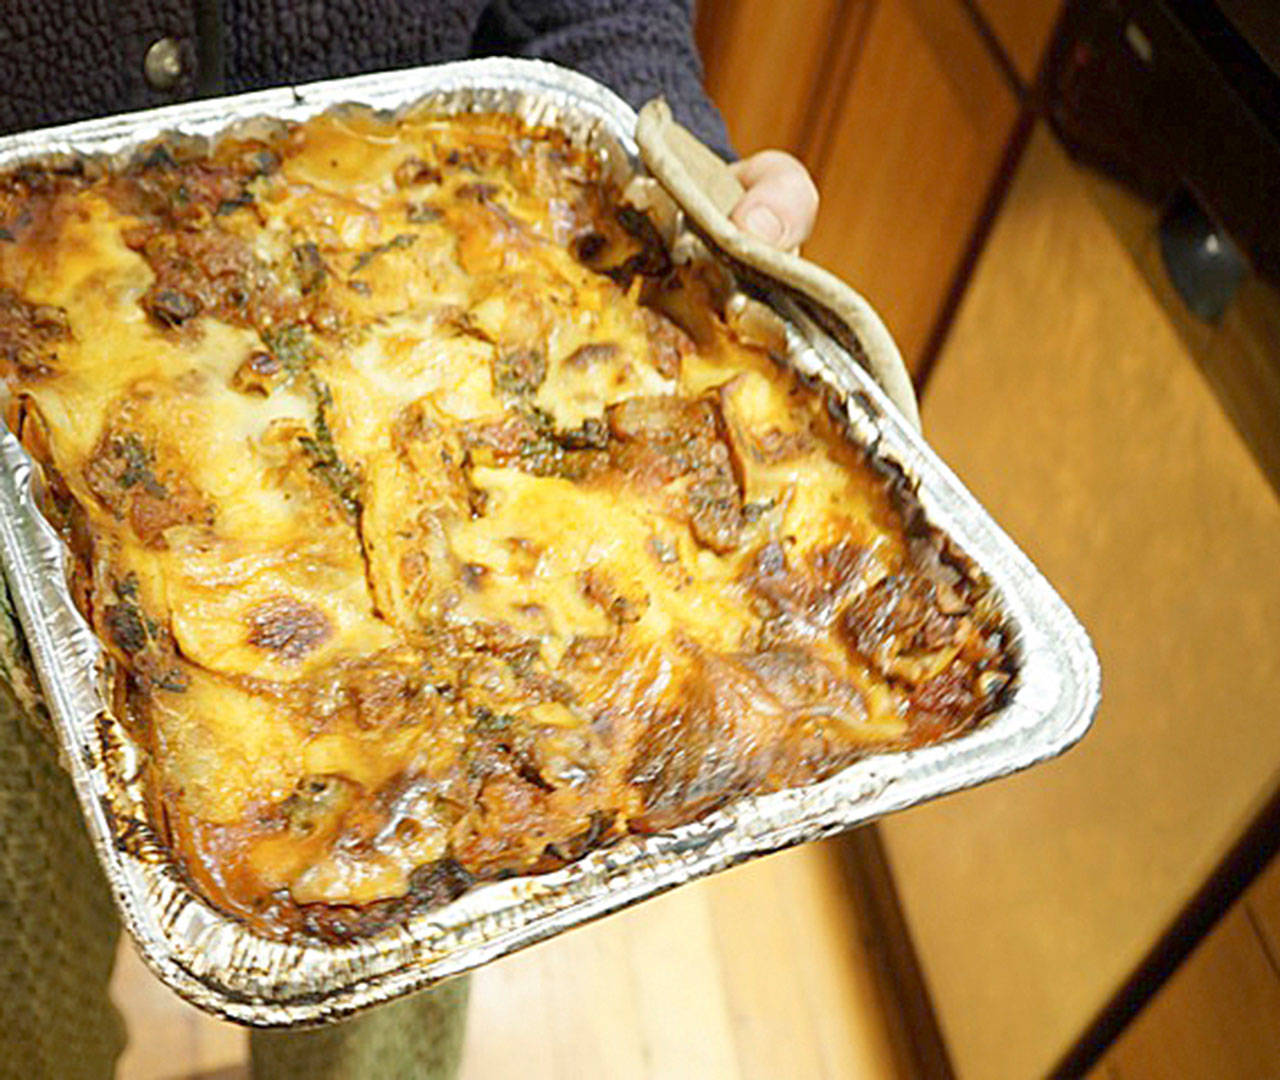 A meatless lasagna is finished cooking and ready to eat. (Betsy Wharton/for Peninsula Daily News)